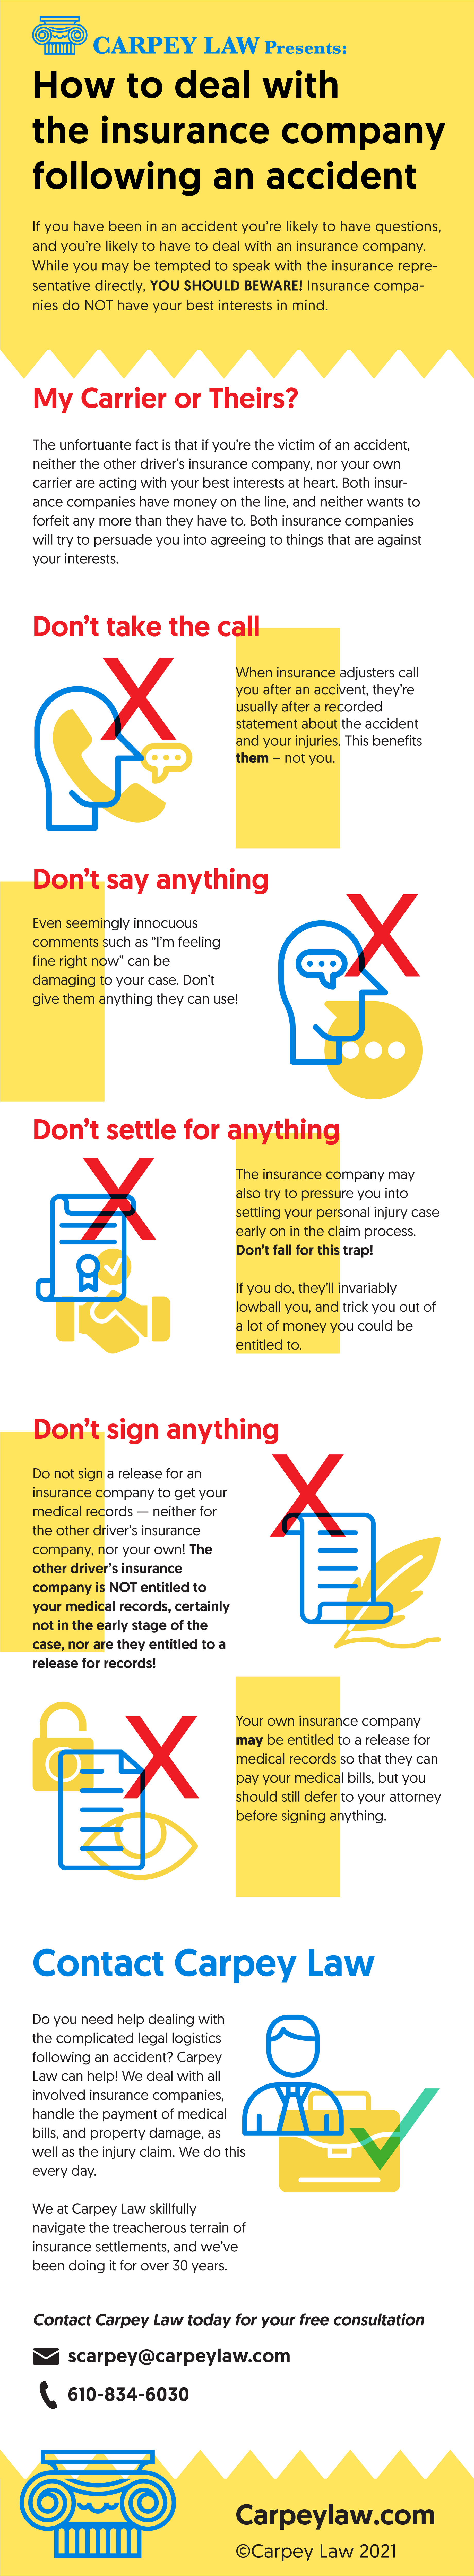 How to deal with the insurance company following an accident infograhic